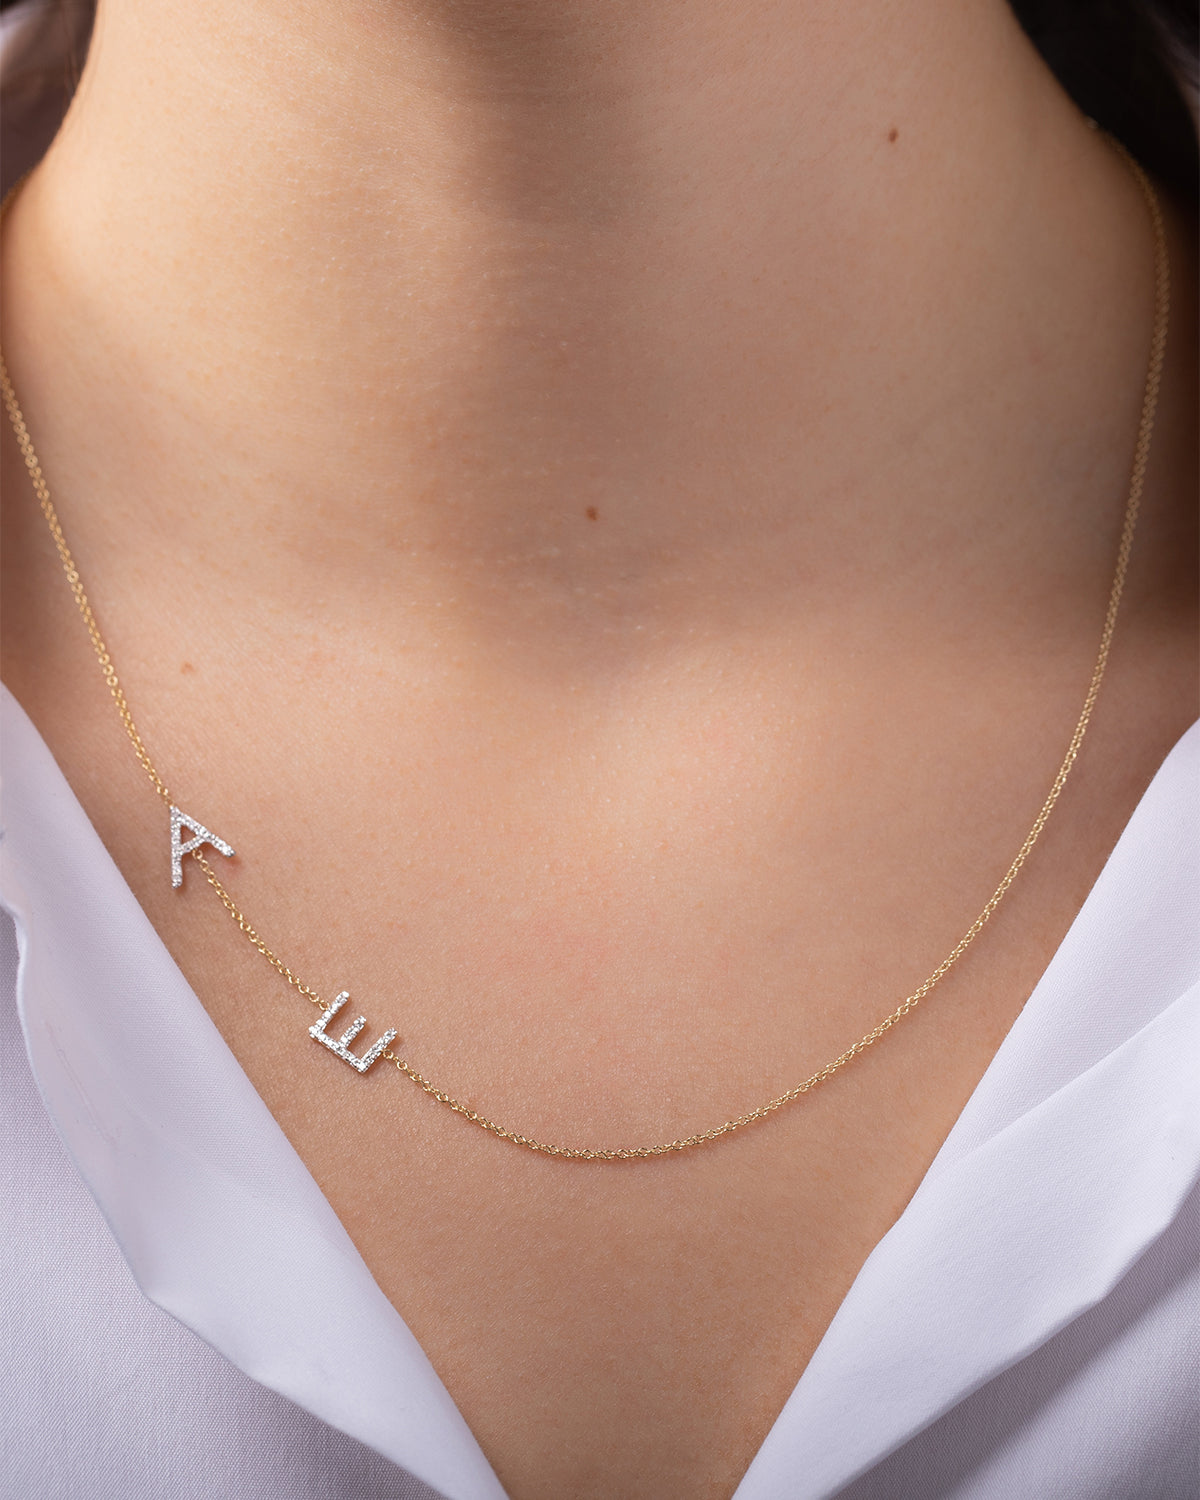 18 Letter Necklaces to Honor Your Kids, Partner Or Just Yourself